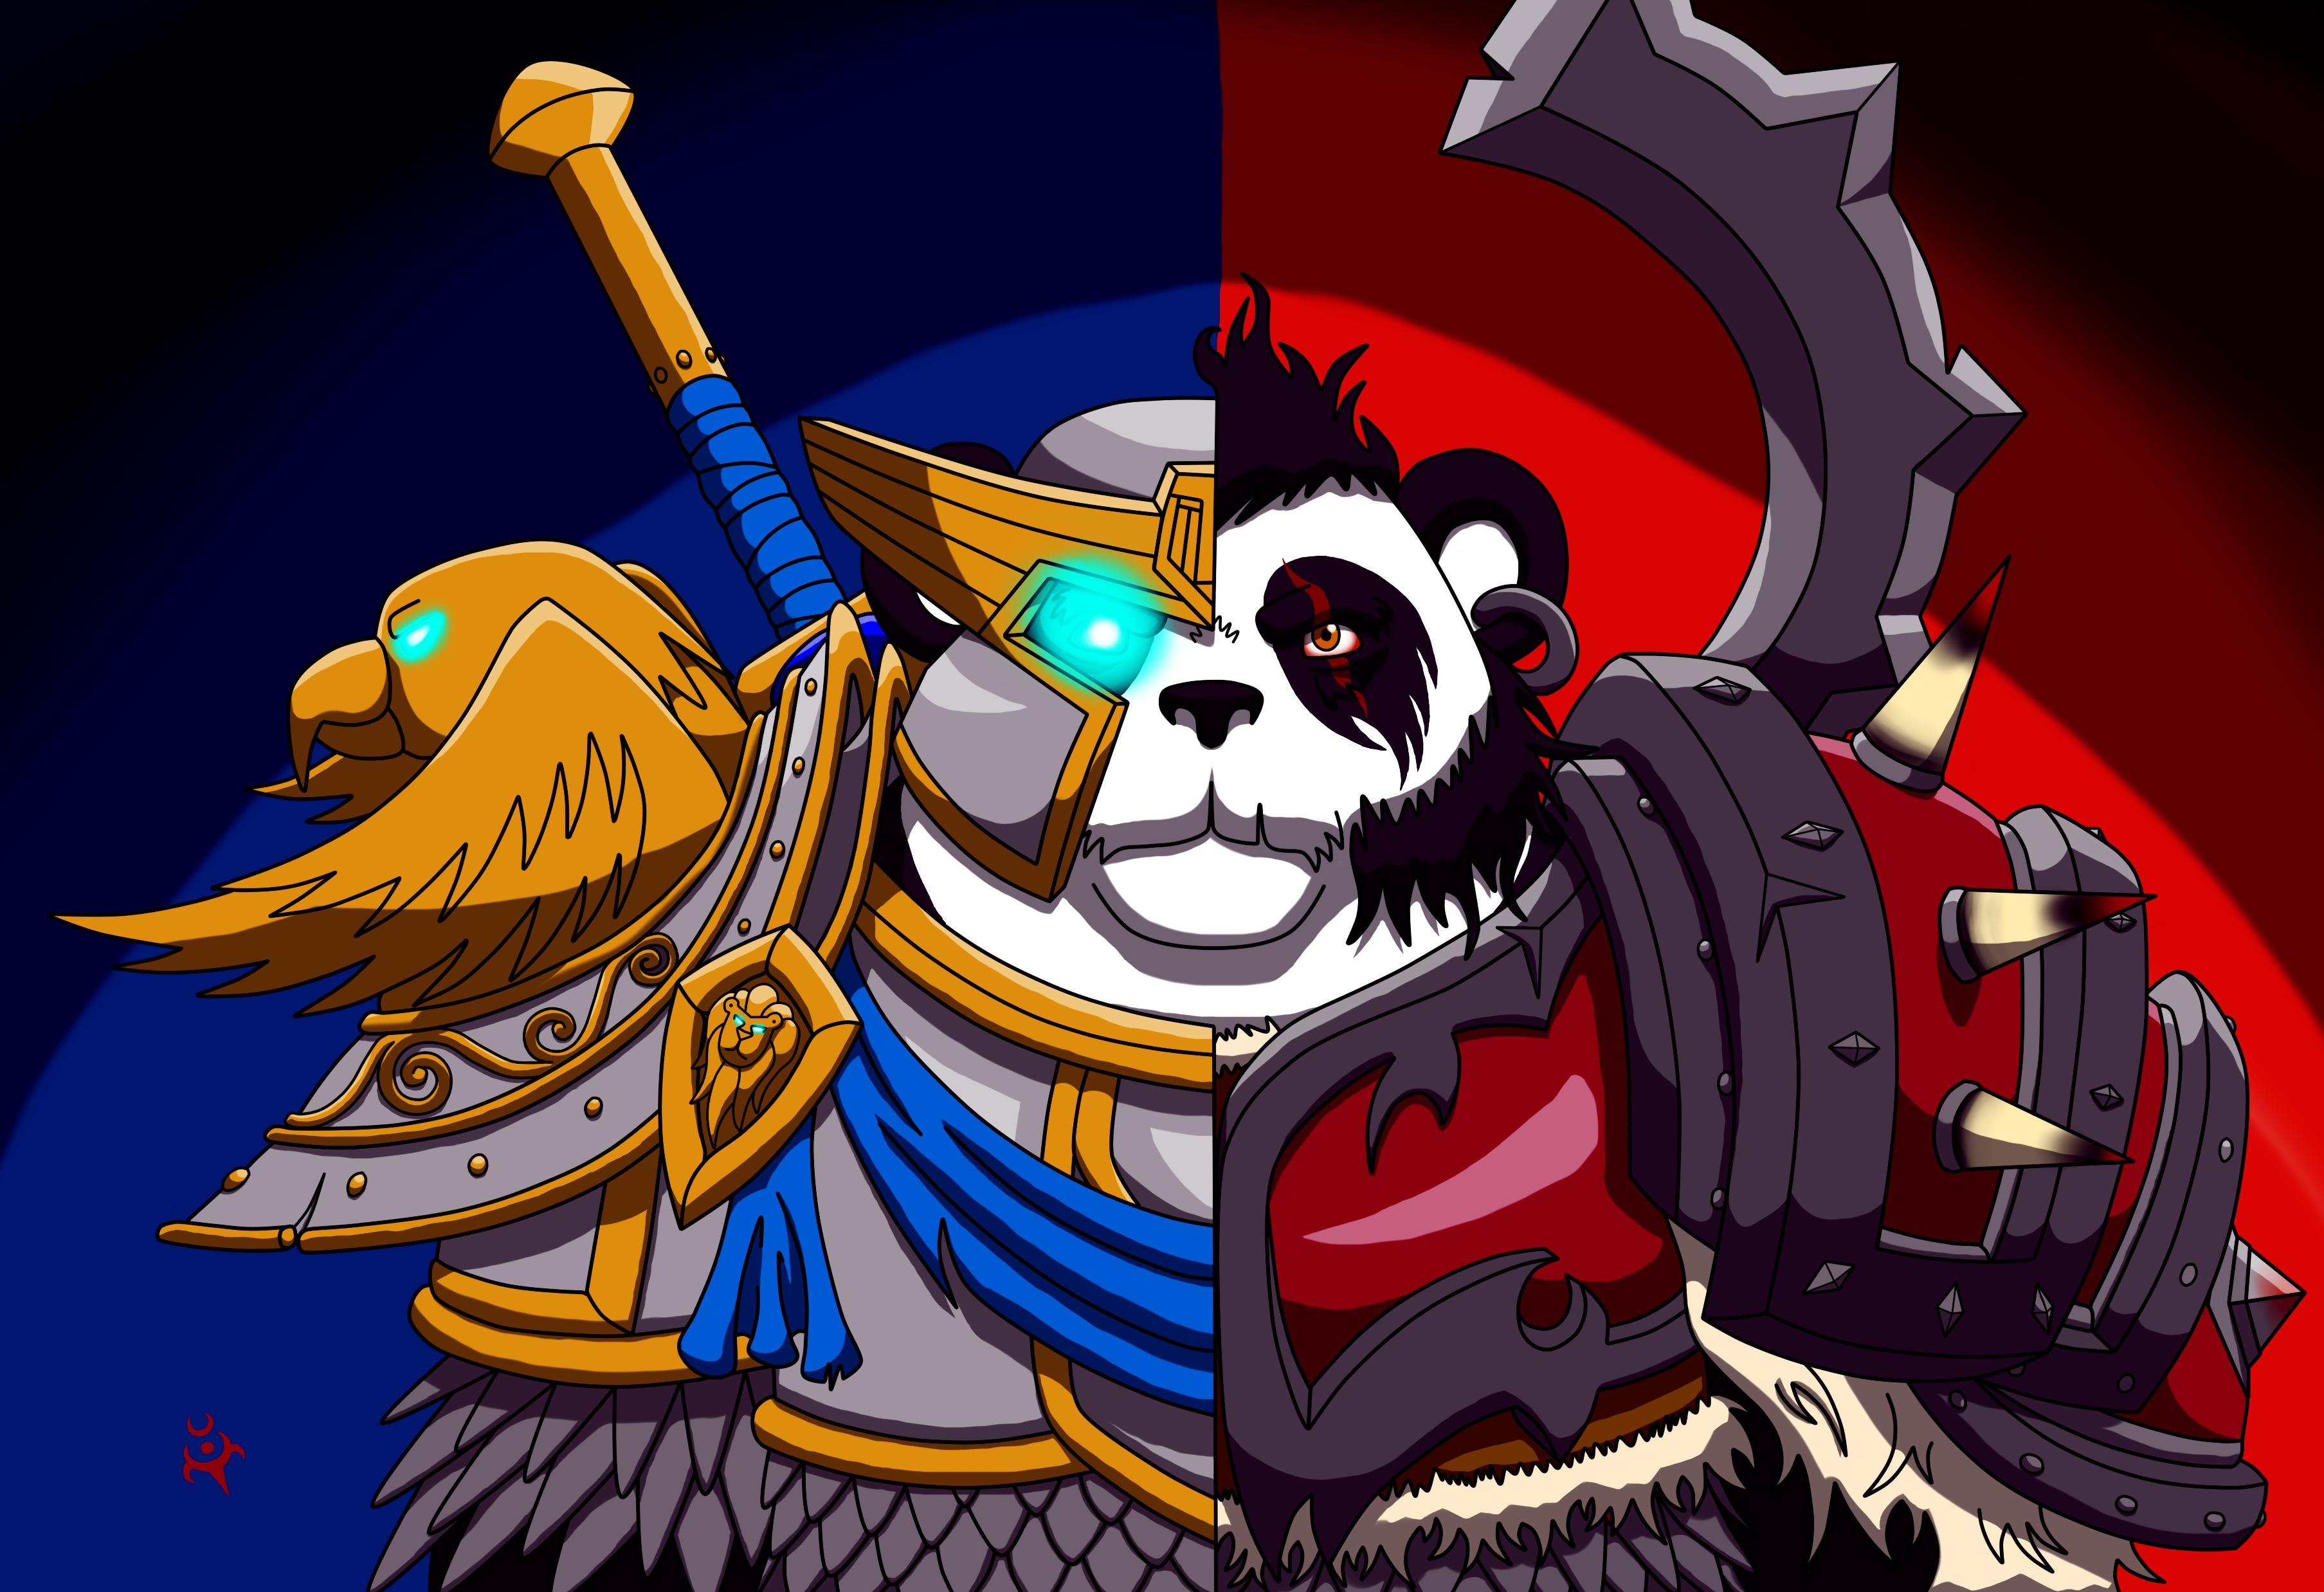 World Of Warcraft, Wow, Alliance And Horde - Wow Panda Warrior , HD Wallpaper & Backgrounds